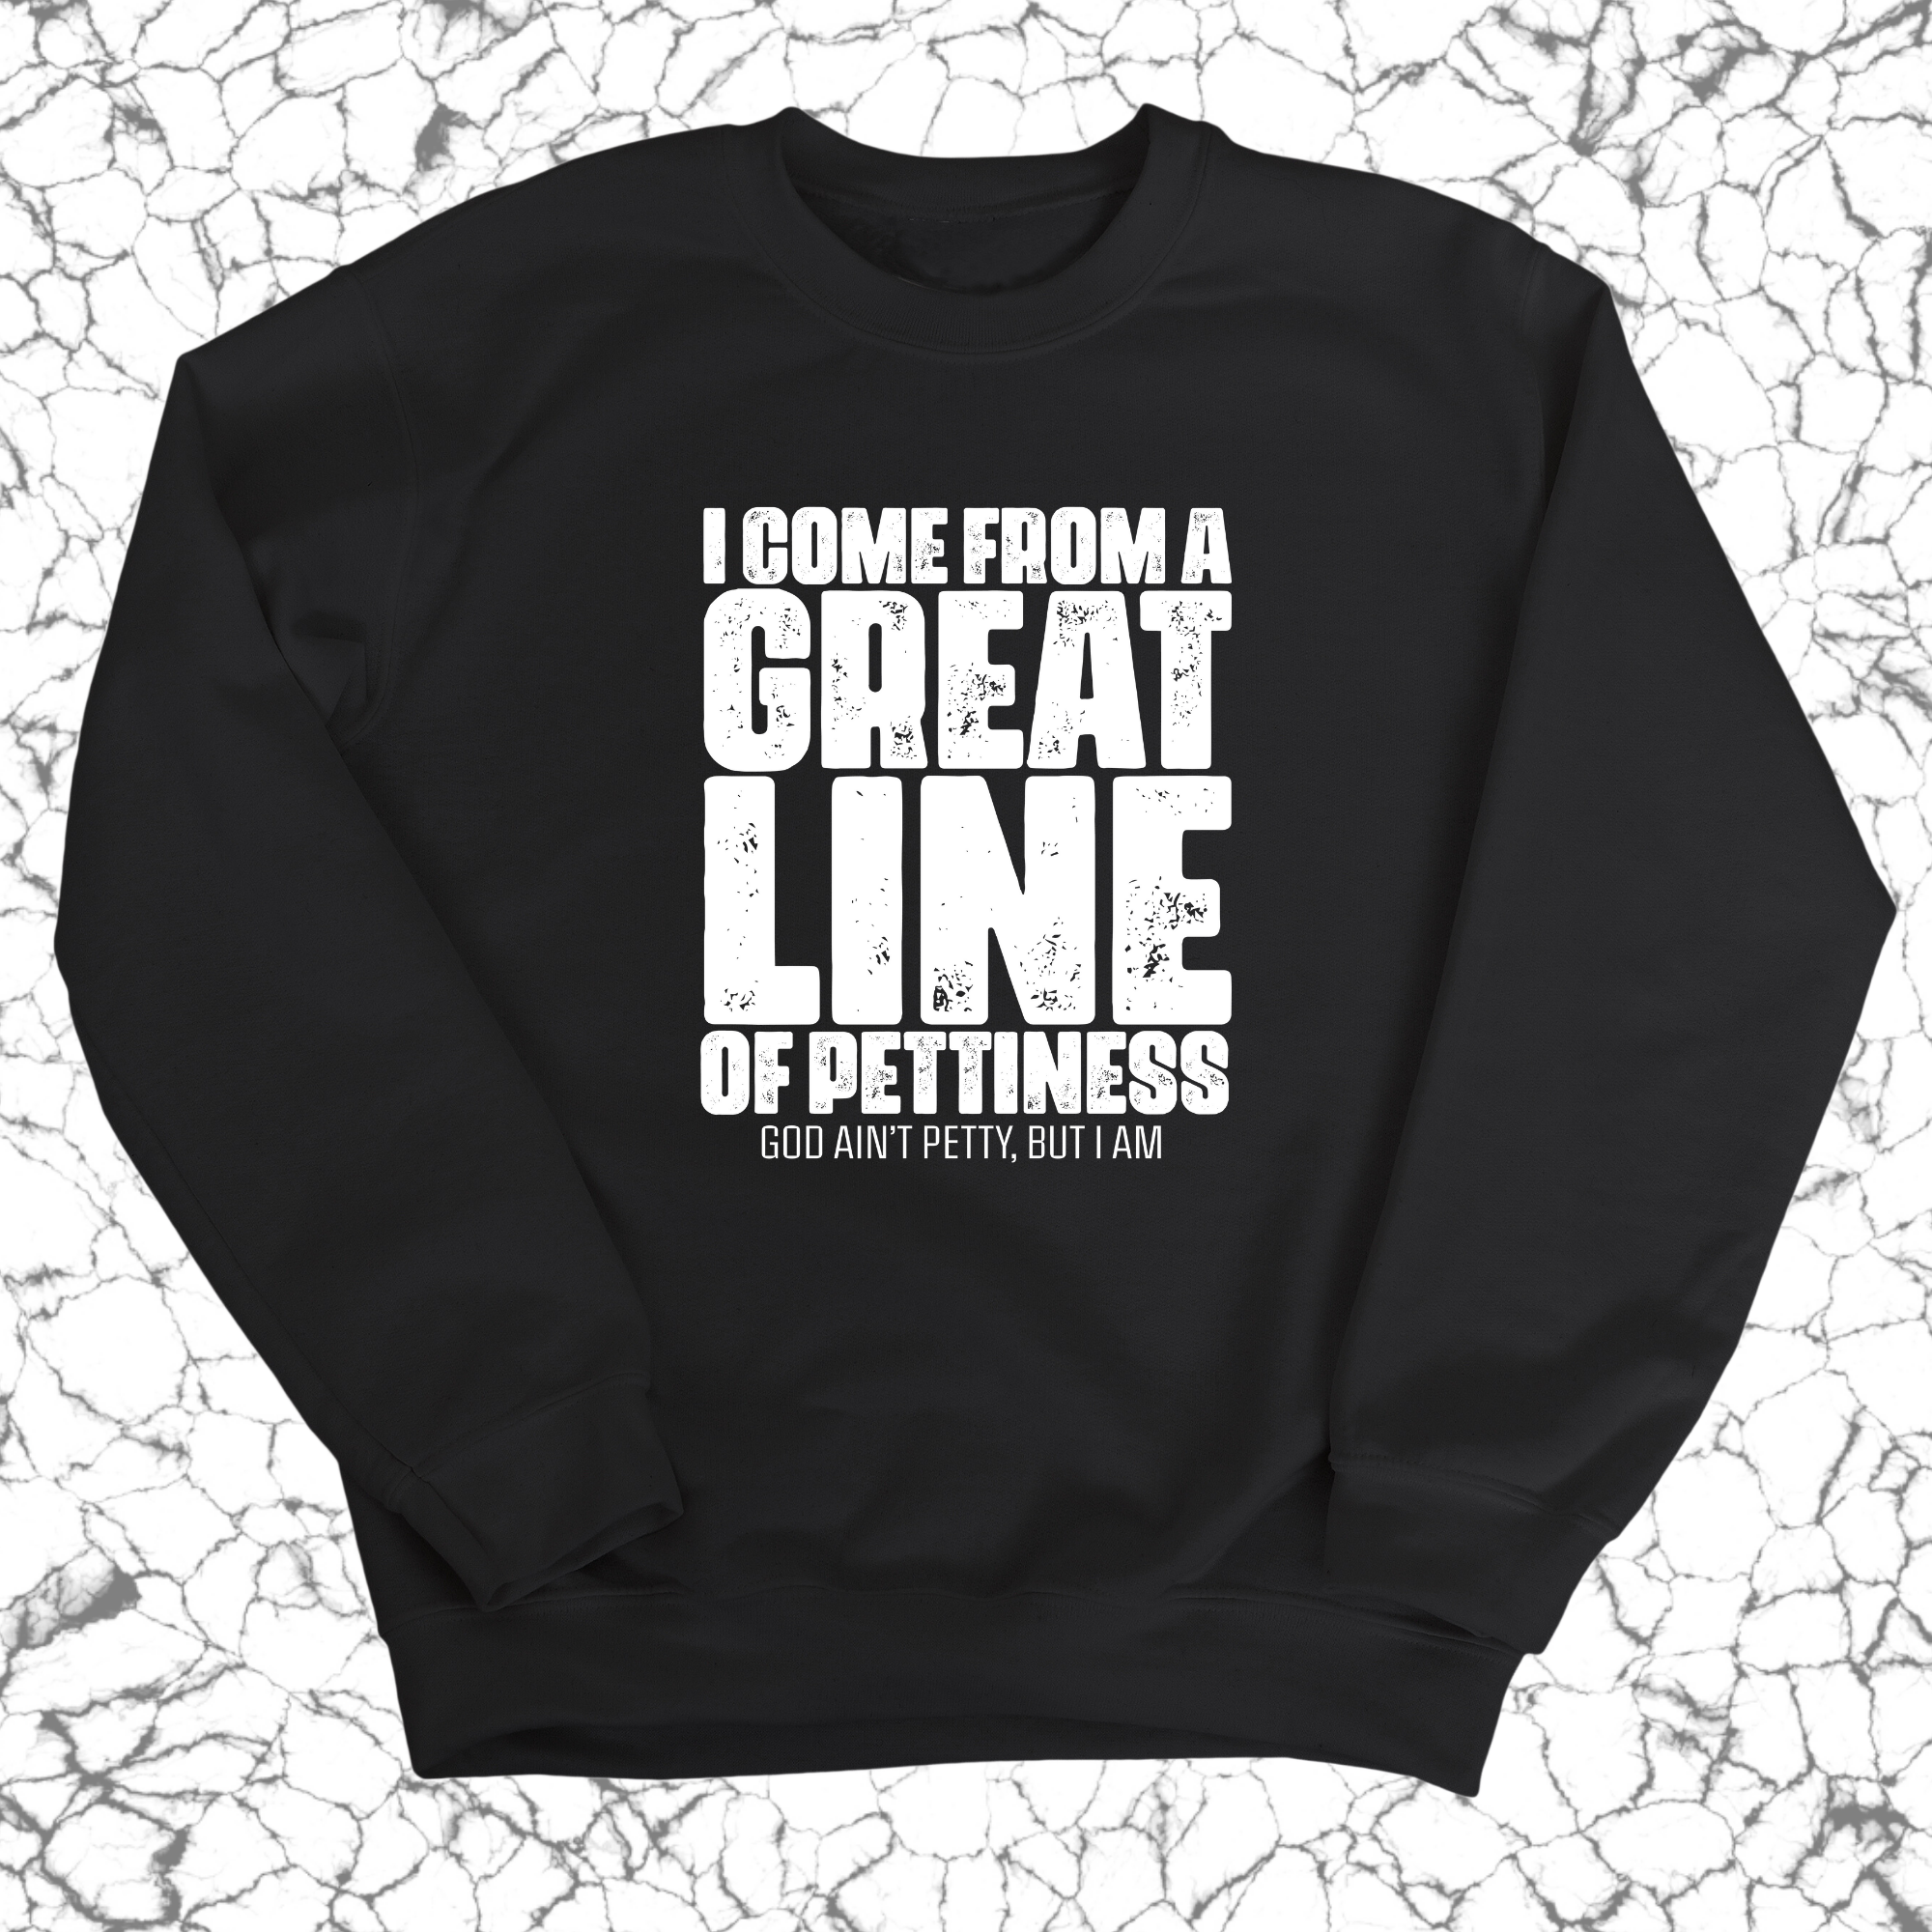 I come from a Great Line of Pettiness Unisex Sweatshirt-Sweatshirt-The Original God Ain't Petty But I Am